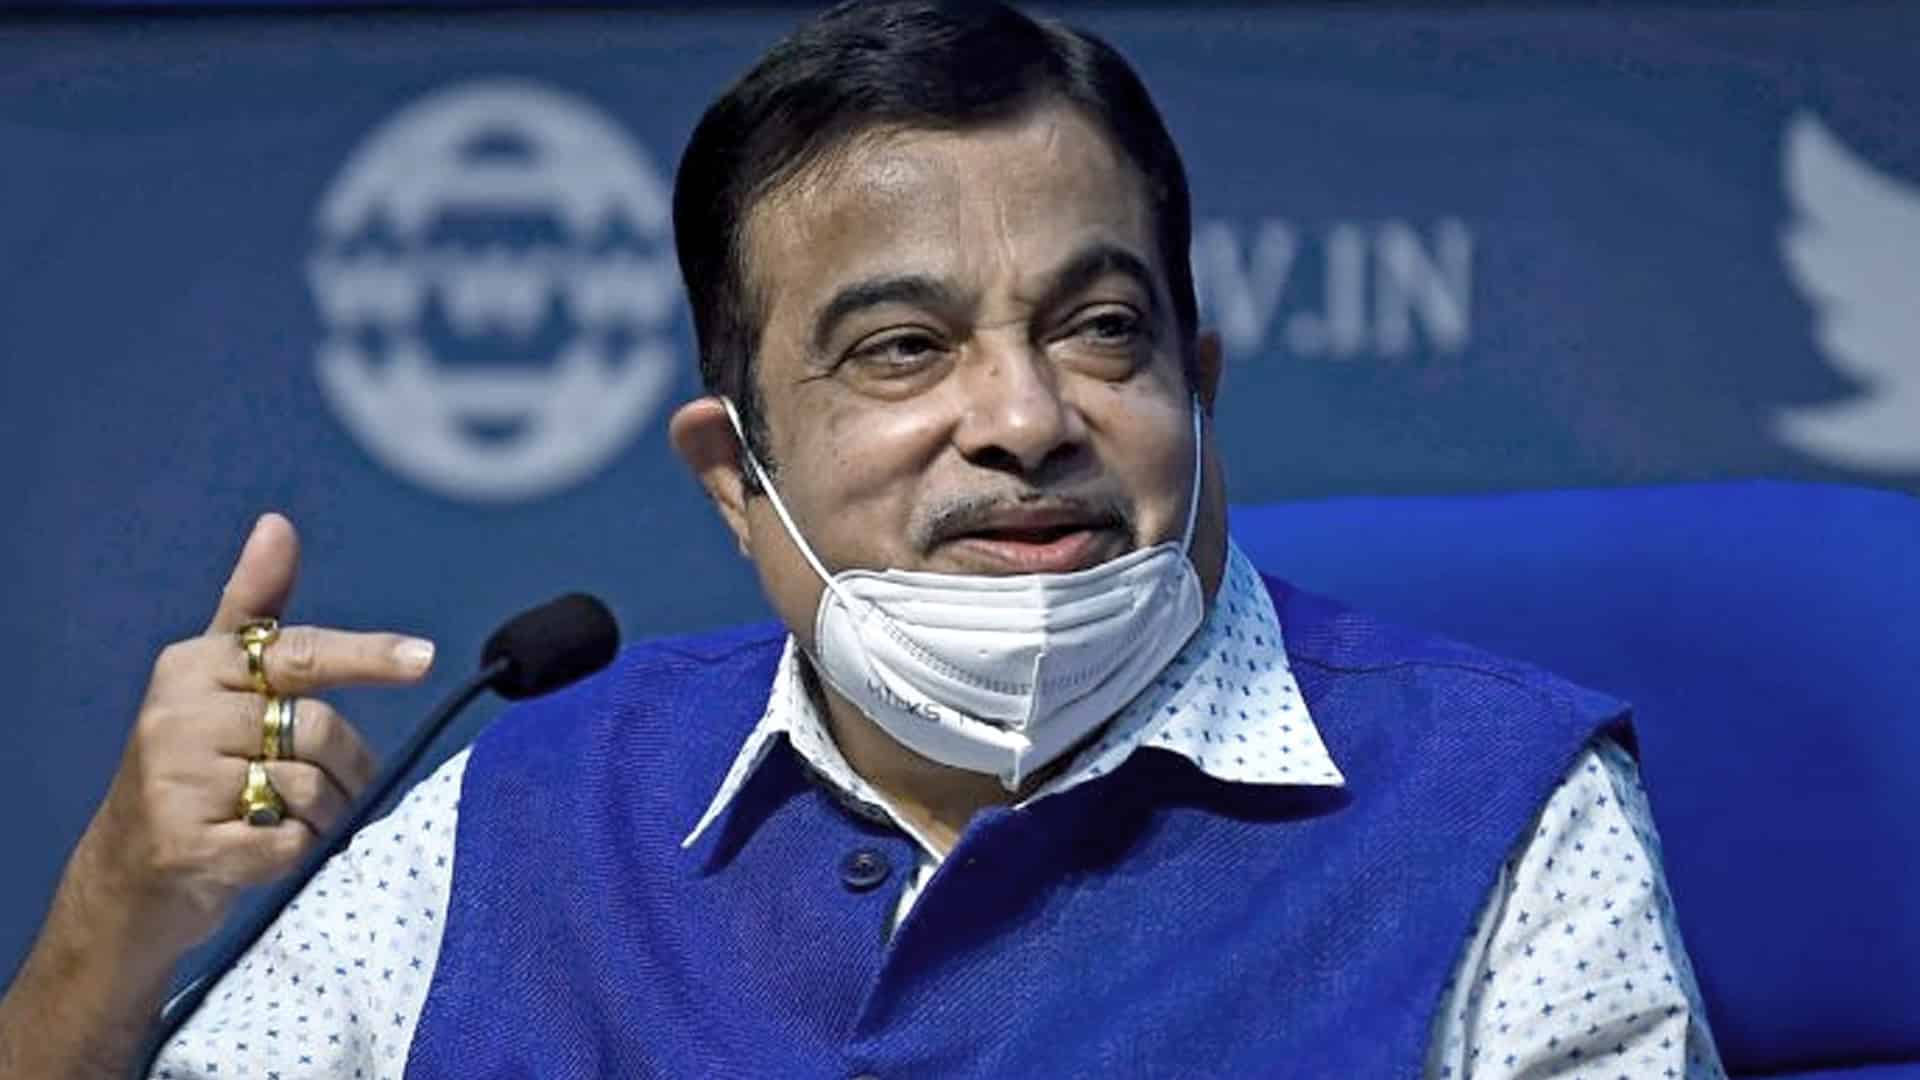 Govt to come out with policy on advanced battery tech to power EVs, India eyes No 1 slot: Gadkari